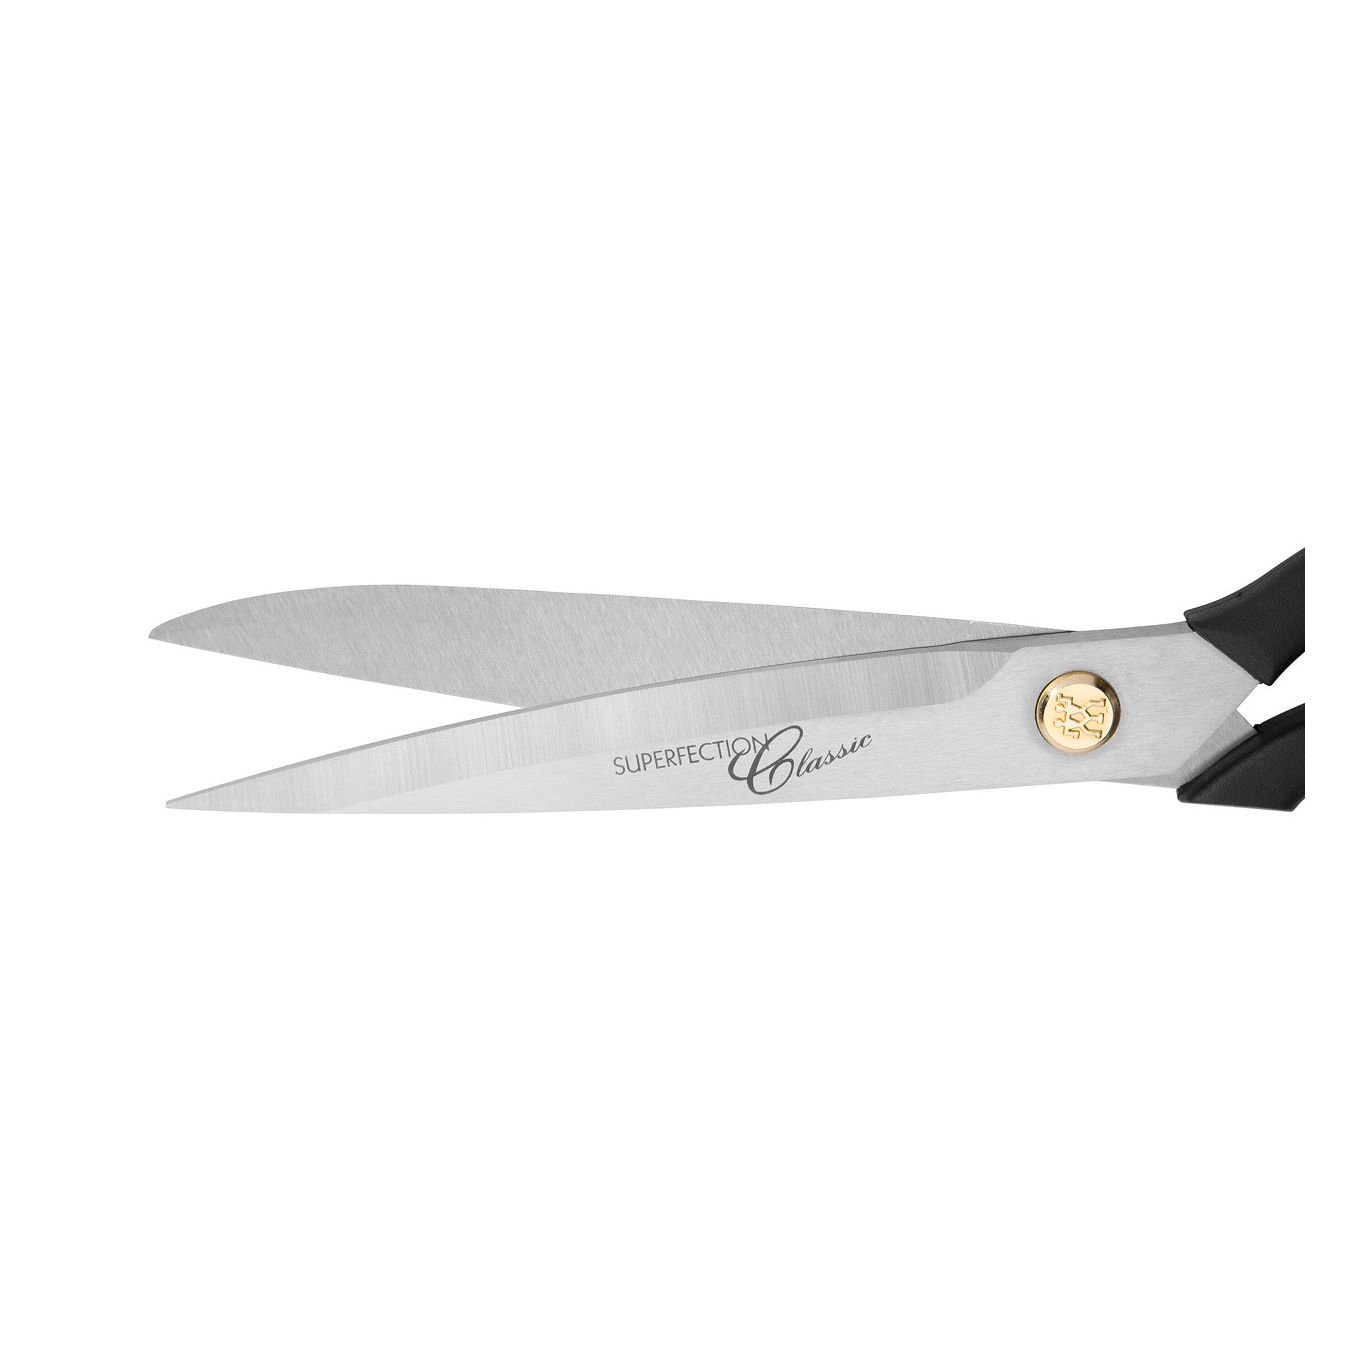 Kingmax K-240 Tailor Scissor (Compare to Dragonfly A240)